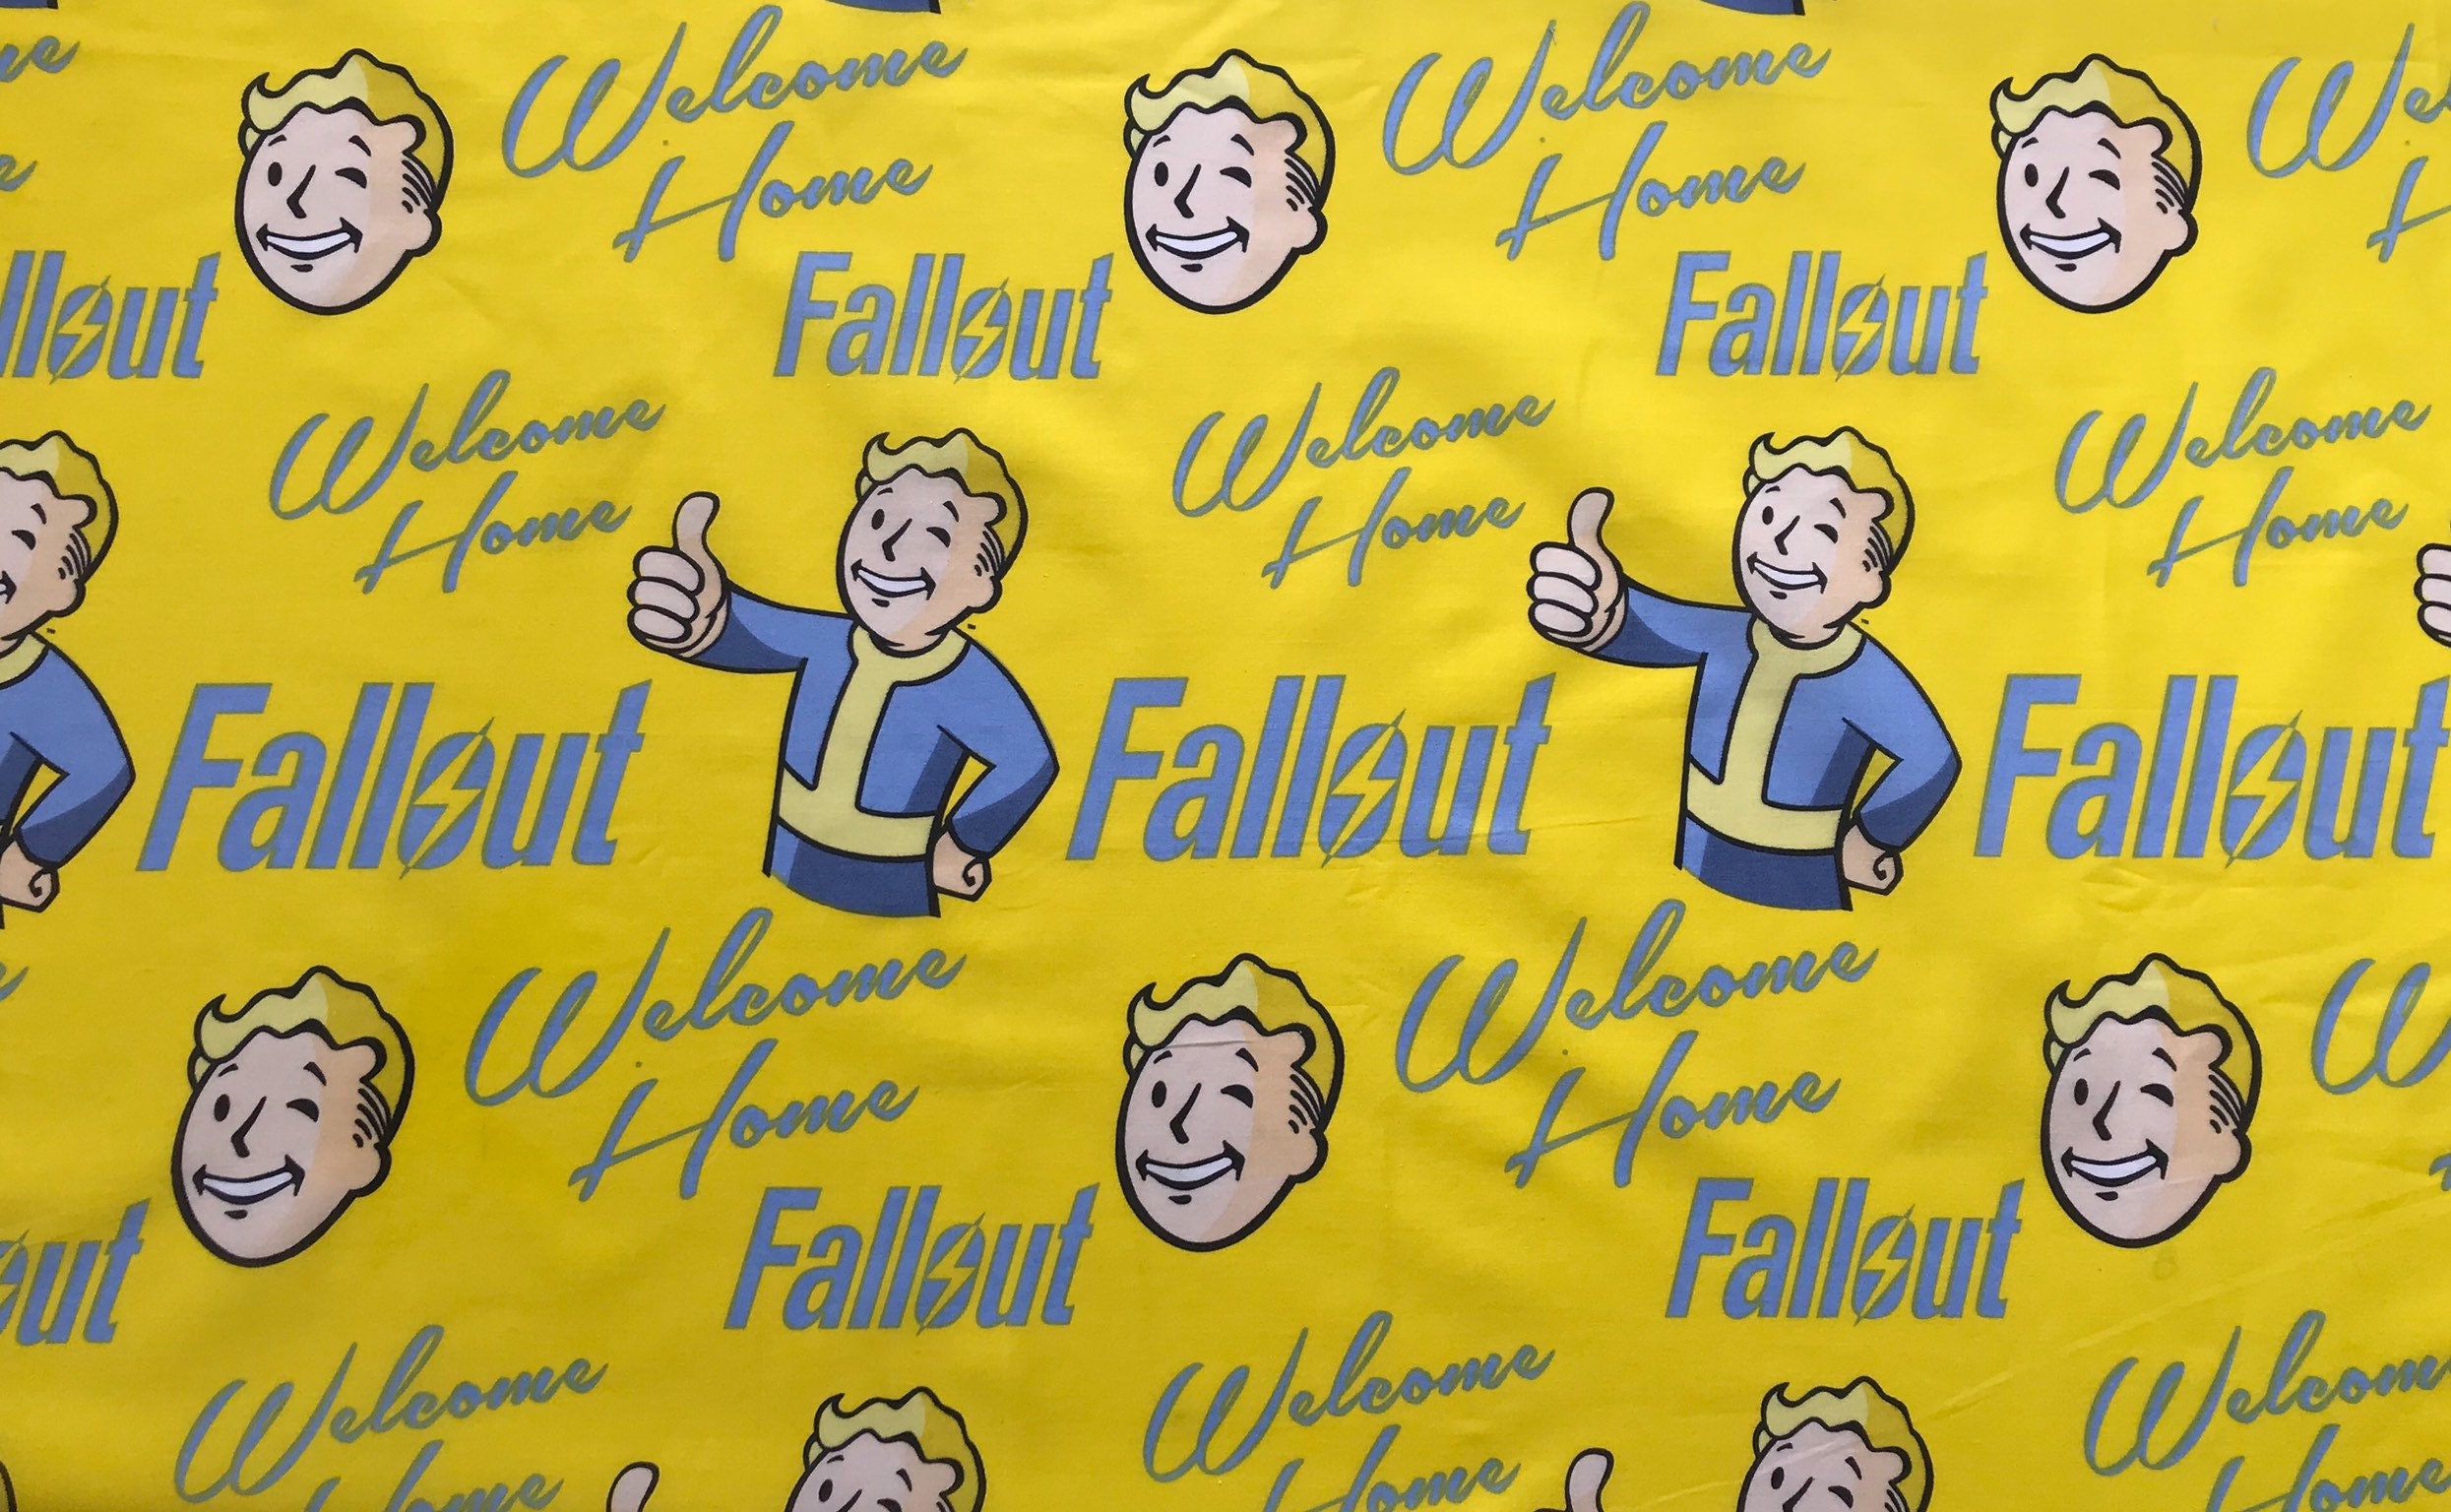 Fallout Vault Boy Welcome Home Gaming Cushion – handmade by Alien